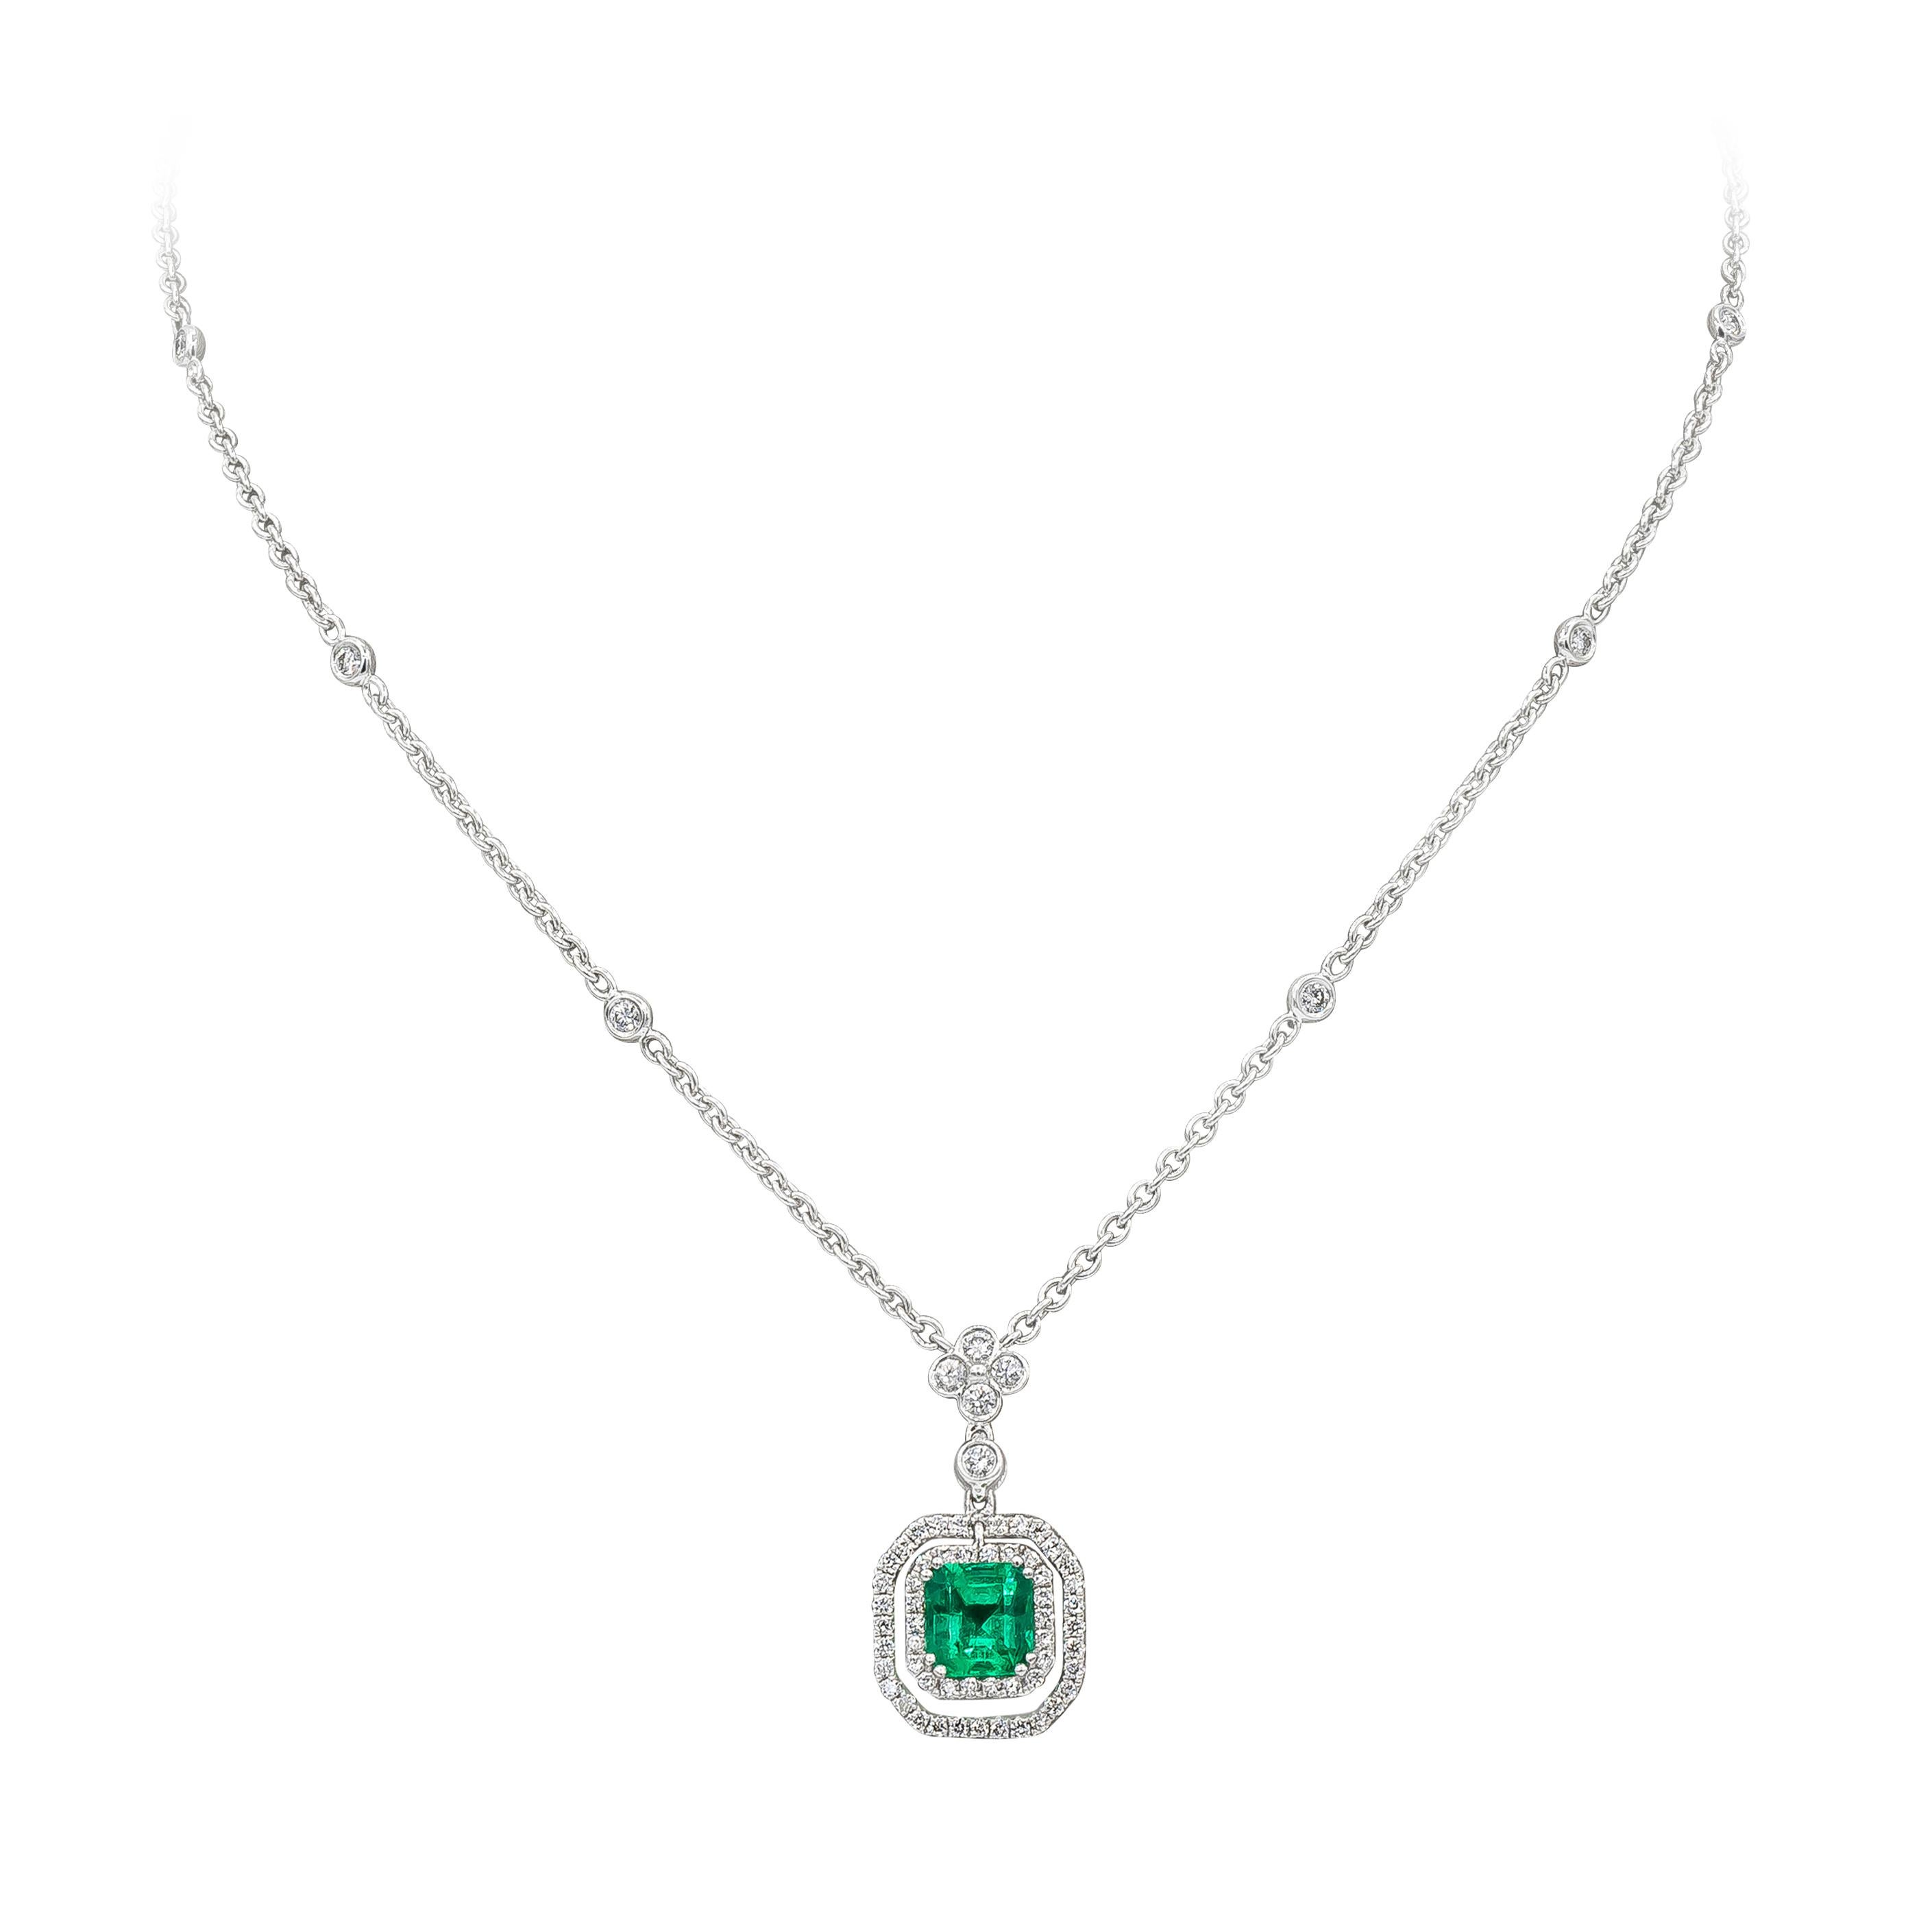 Showcasing a 1.18 carat emerald cut green emerald, set in a beautiful open-work double halo encrusted with diamonds. Diamonds weigh 0.71 carats total. Set in a diamonds by the yard chain. Made with 18K White Gold, 17 inches in Length.

Roman Malakov